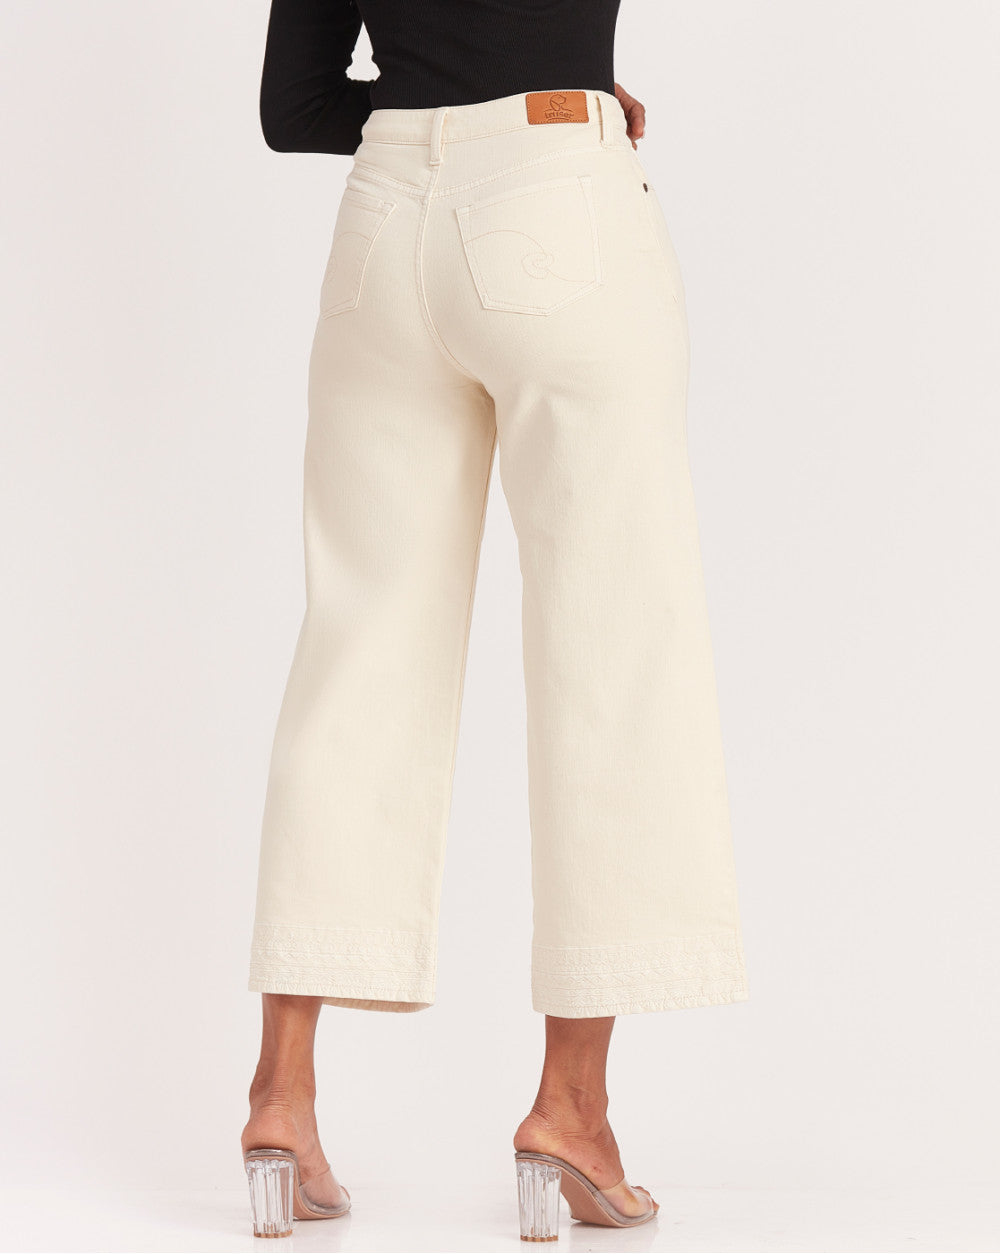 Wide Leg High Waist Boho Embroidered Colored Jeans - Cream